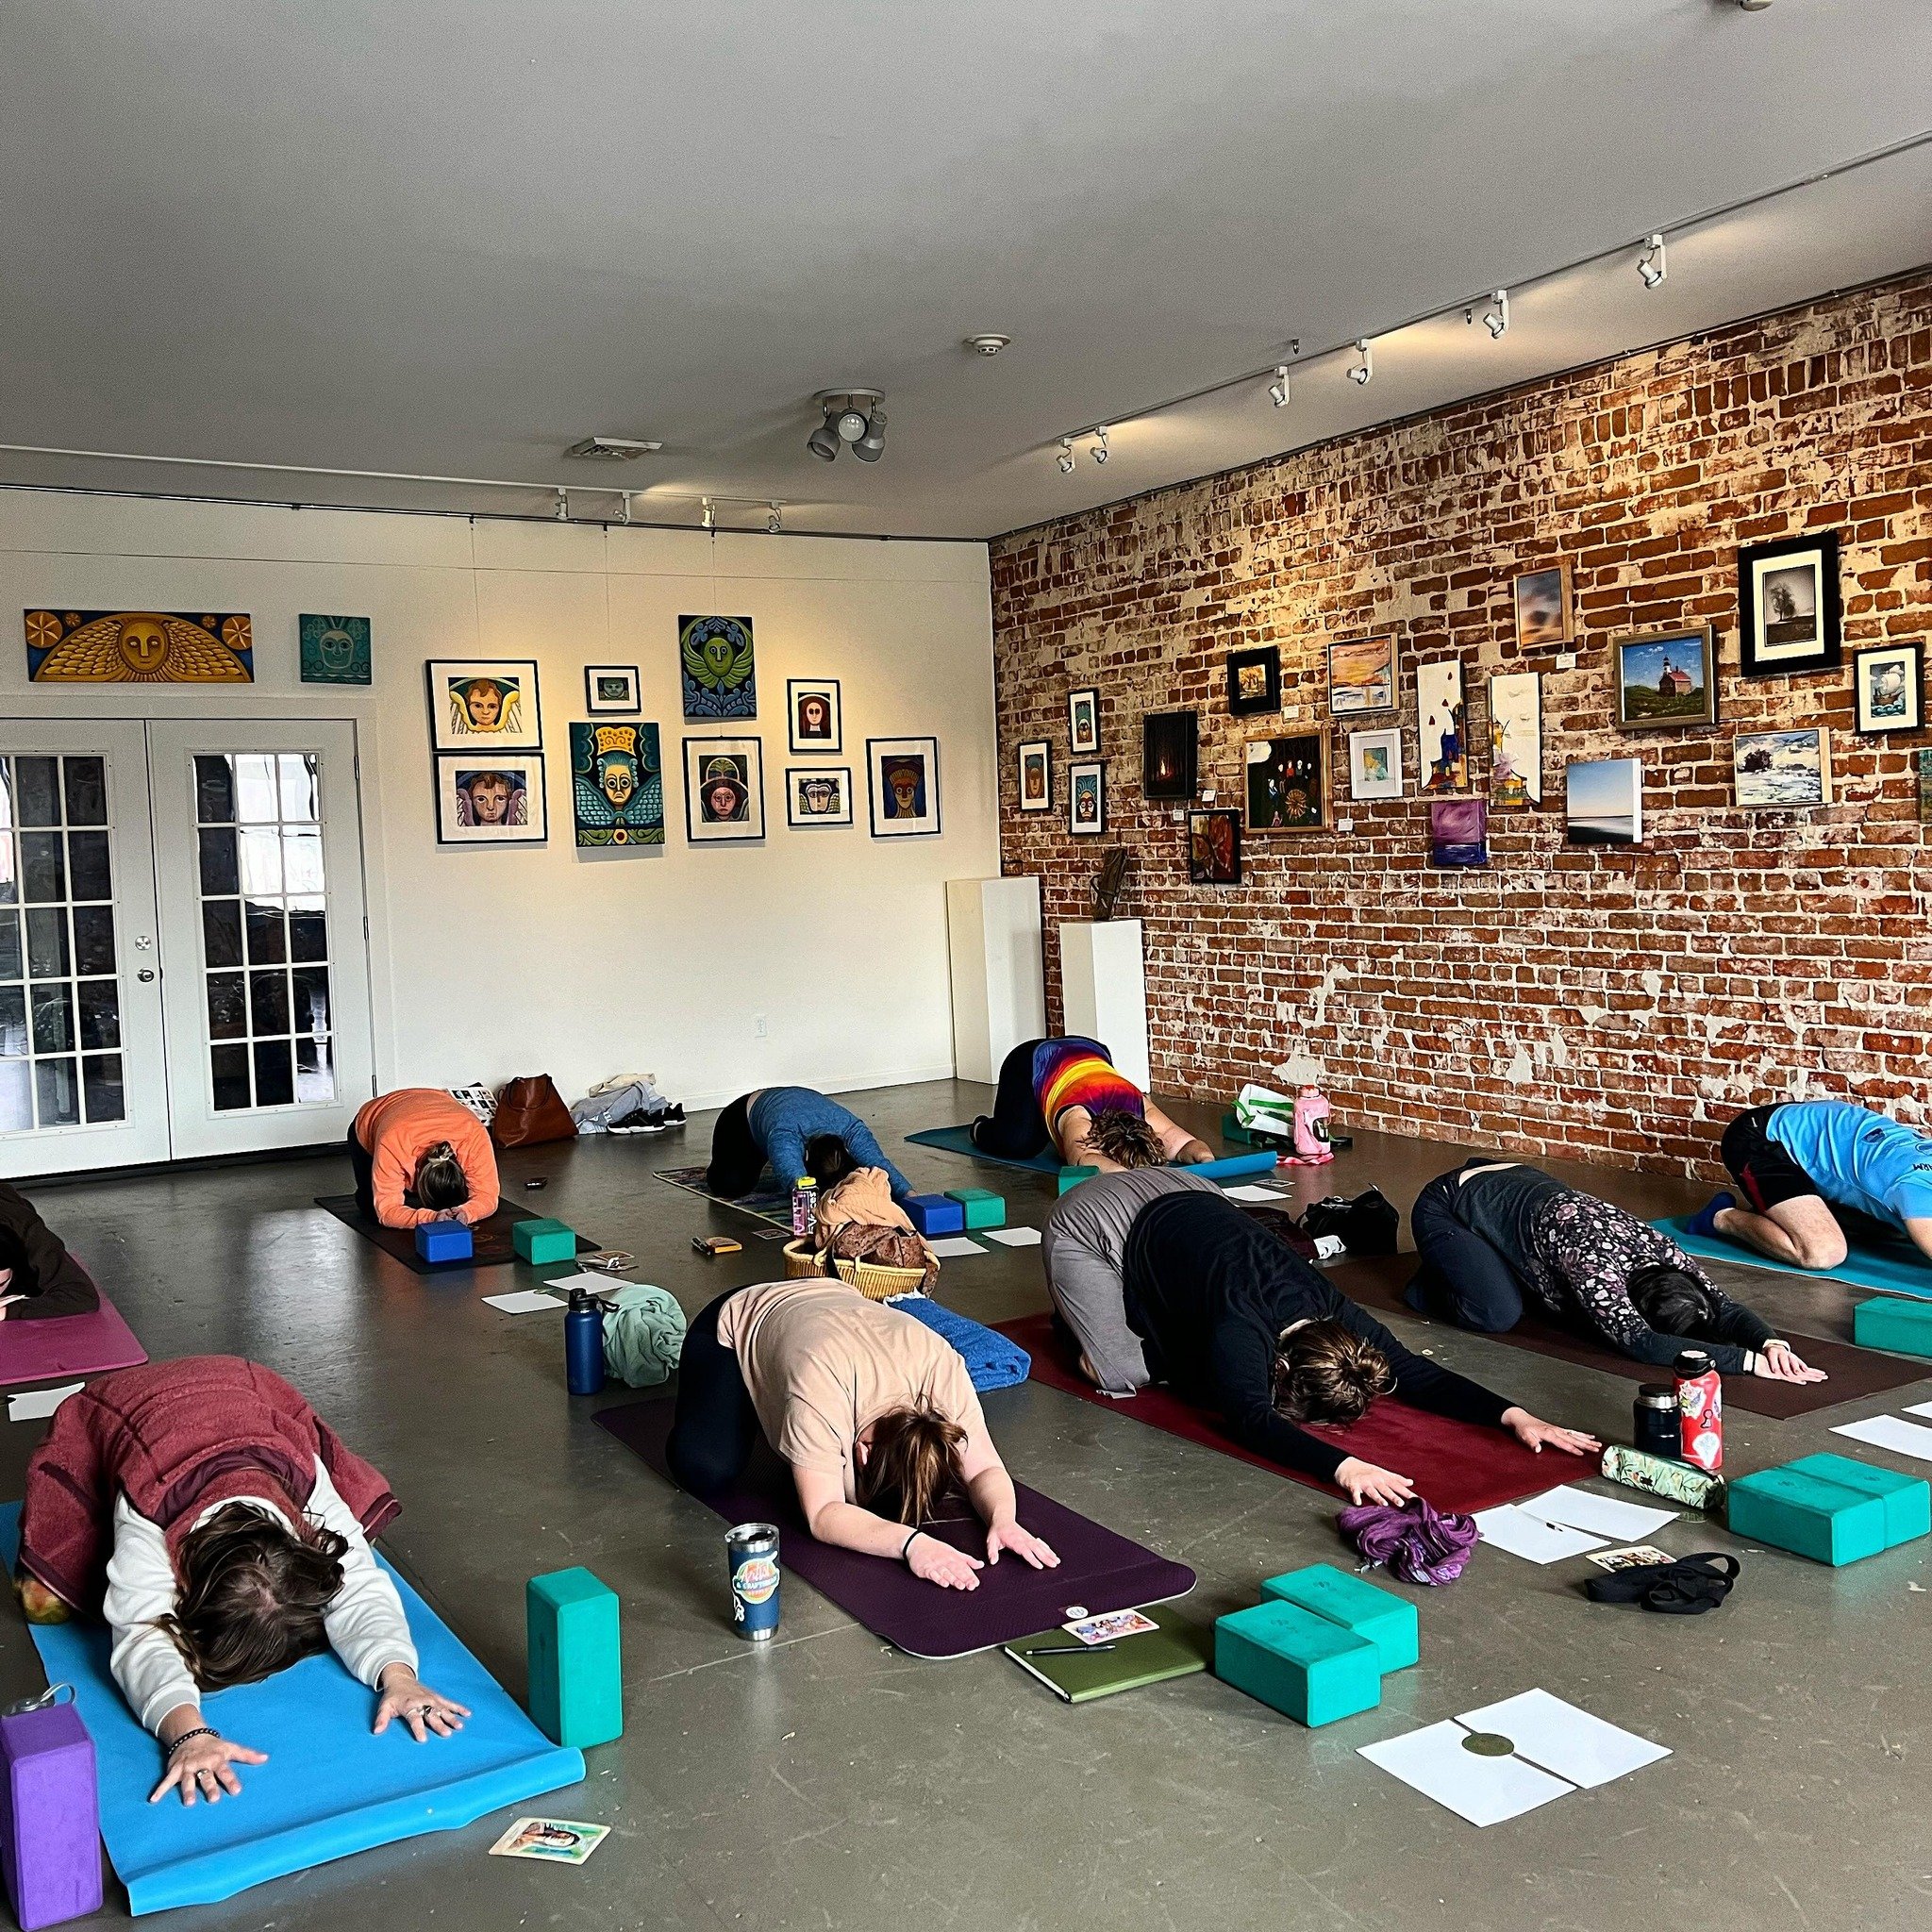 Join us in this beautiful space for some upcoming events: we have some incredible events lined up that we think you&rsquo;ll love. From rejuvenating yoga workshops and retreats to soul-nourishing gong baths, we&rsquo;re committed to providing transfo